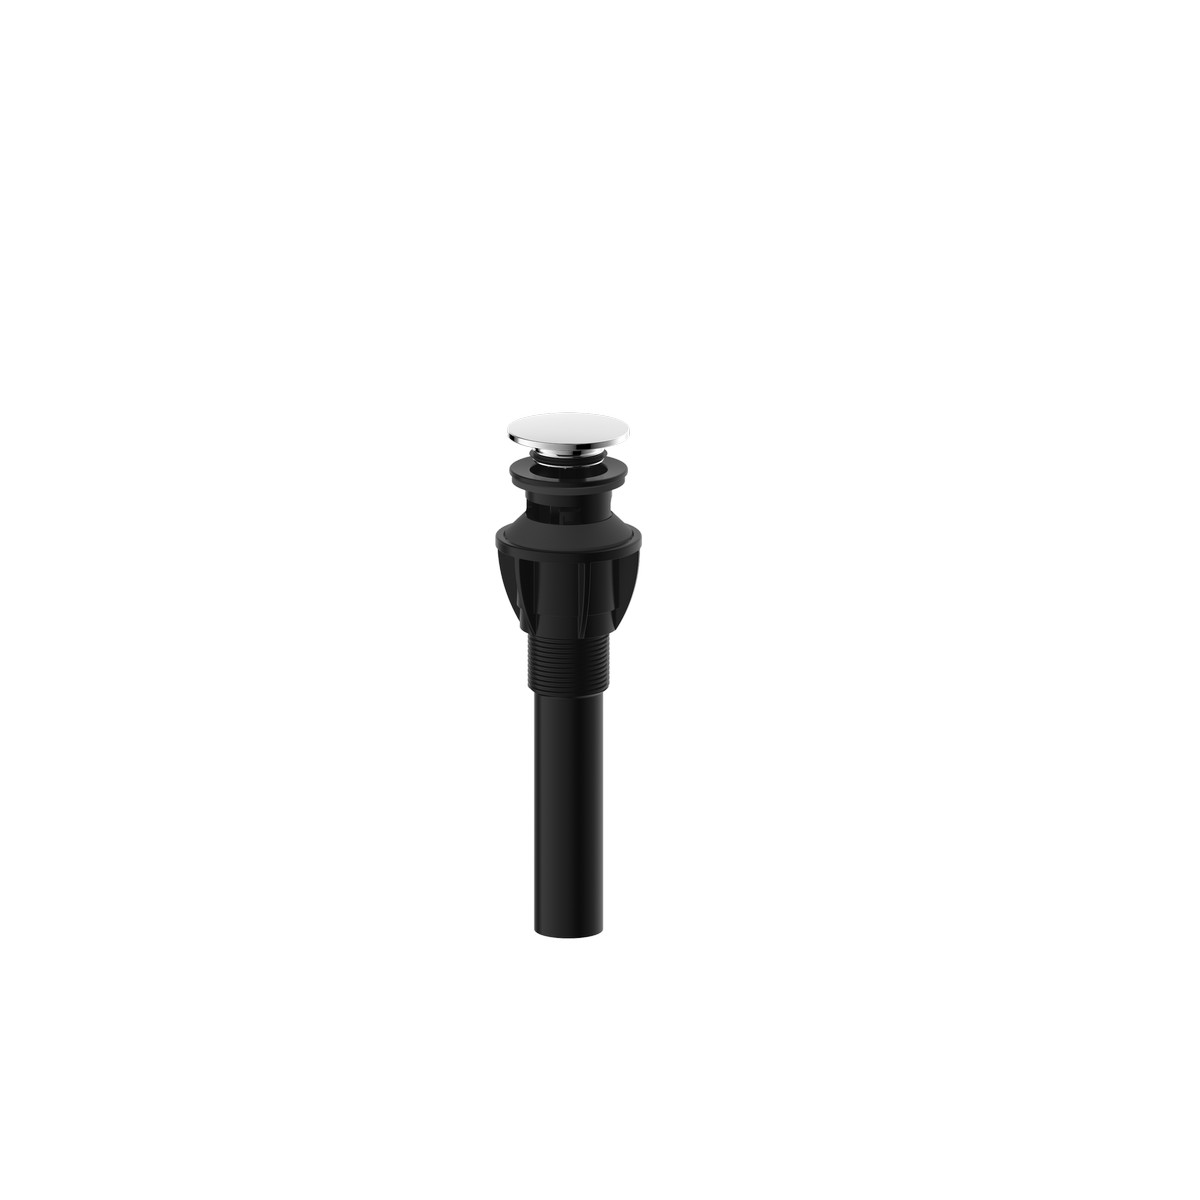 ULTRA FAUCETS UFP-002 PUSH POP-UP DRAIN ASSEMBLY WITH OVERFLOW